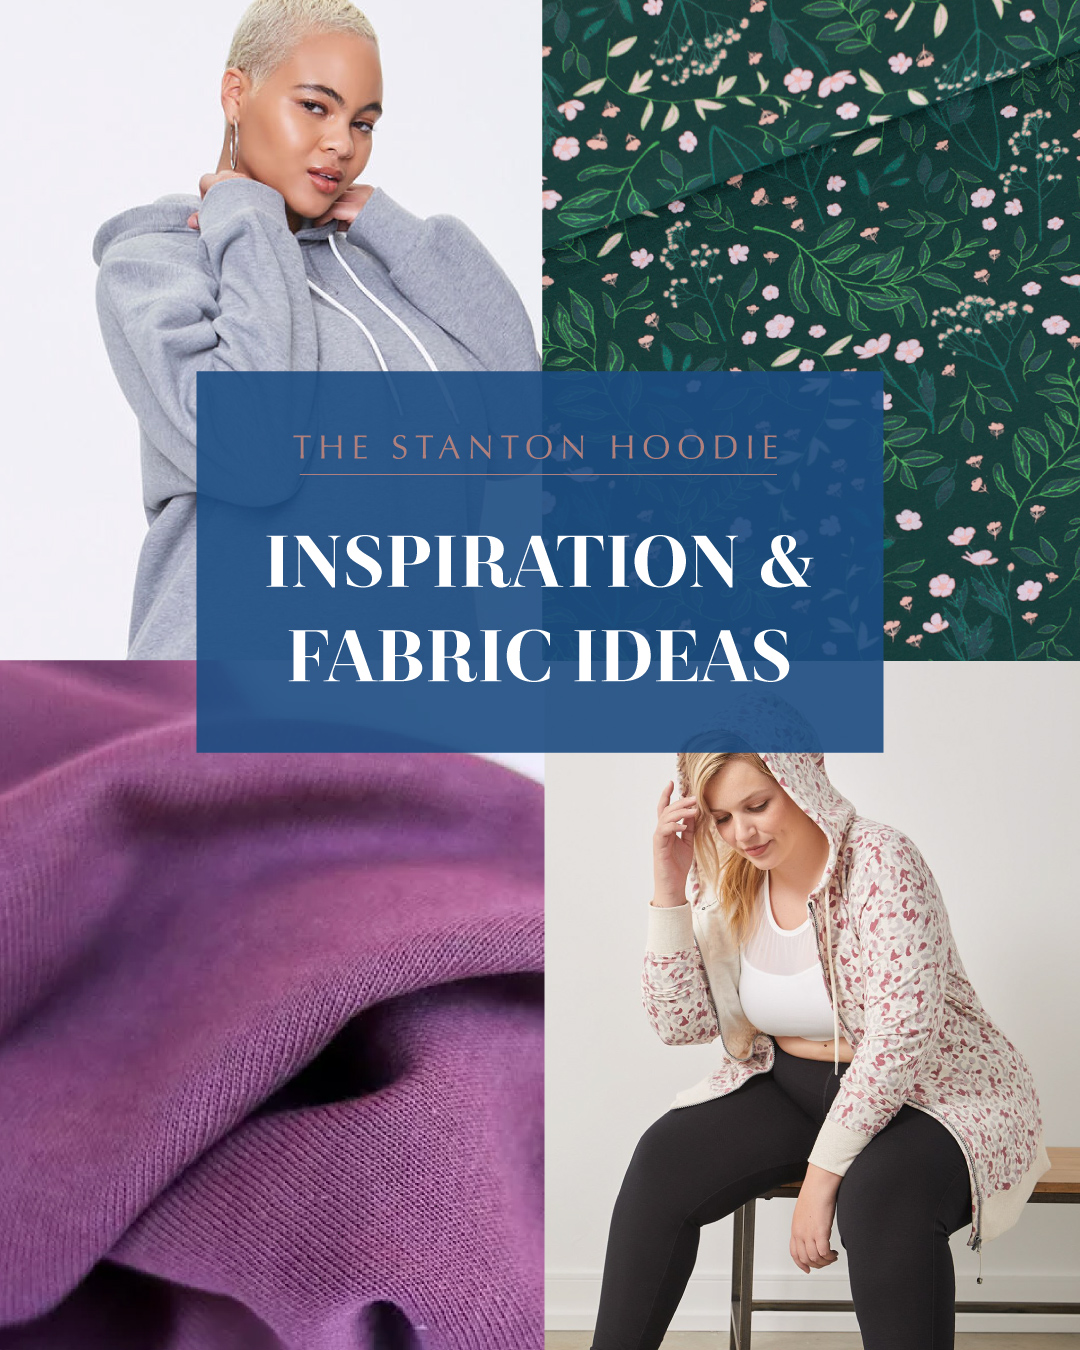 Get Inspired to Sew the Stanton Hoodie!